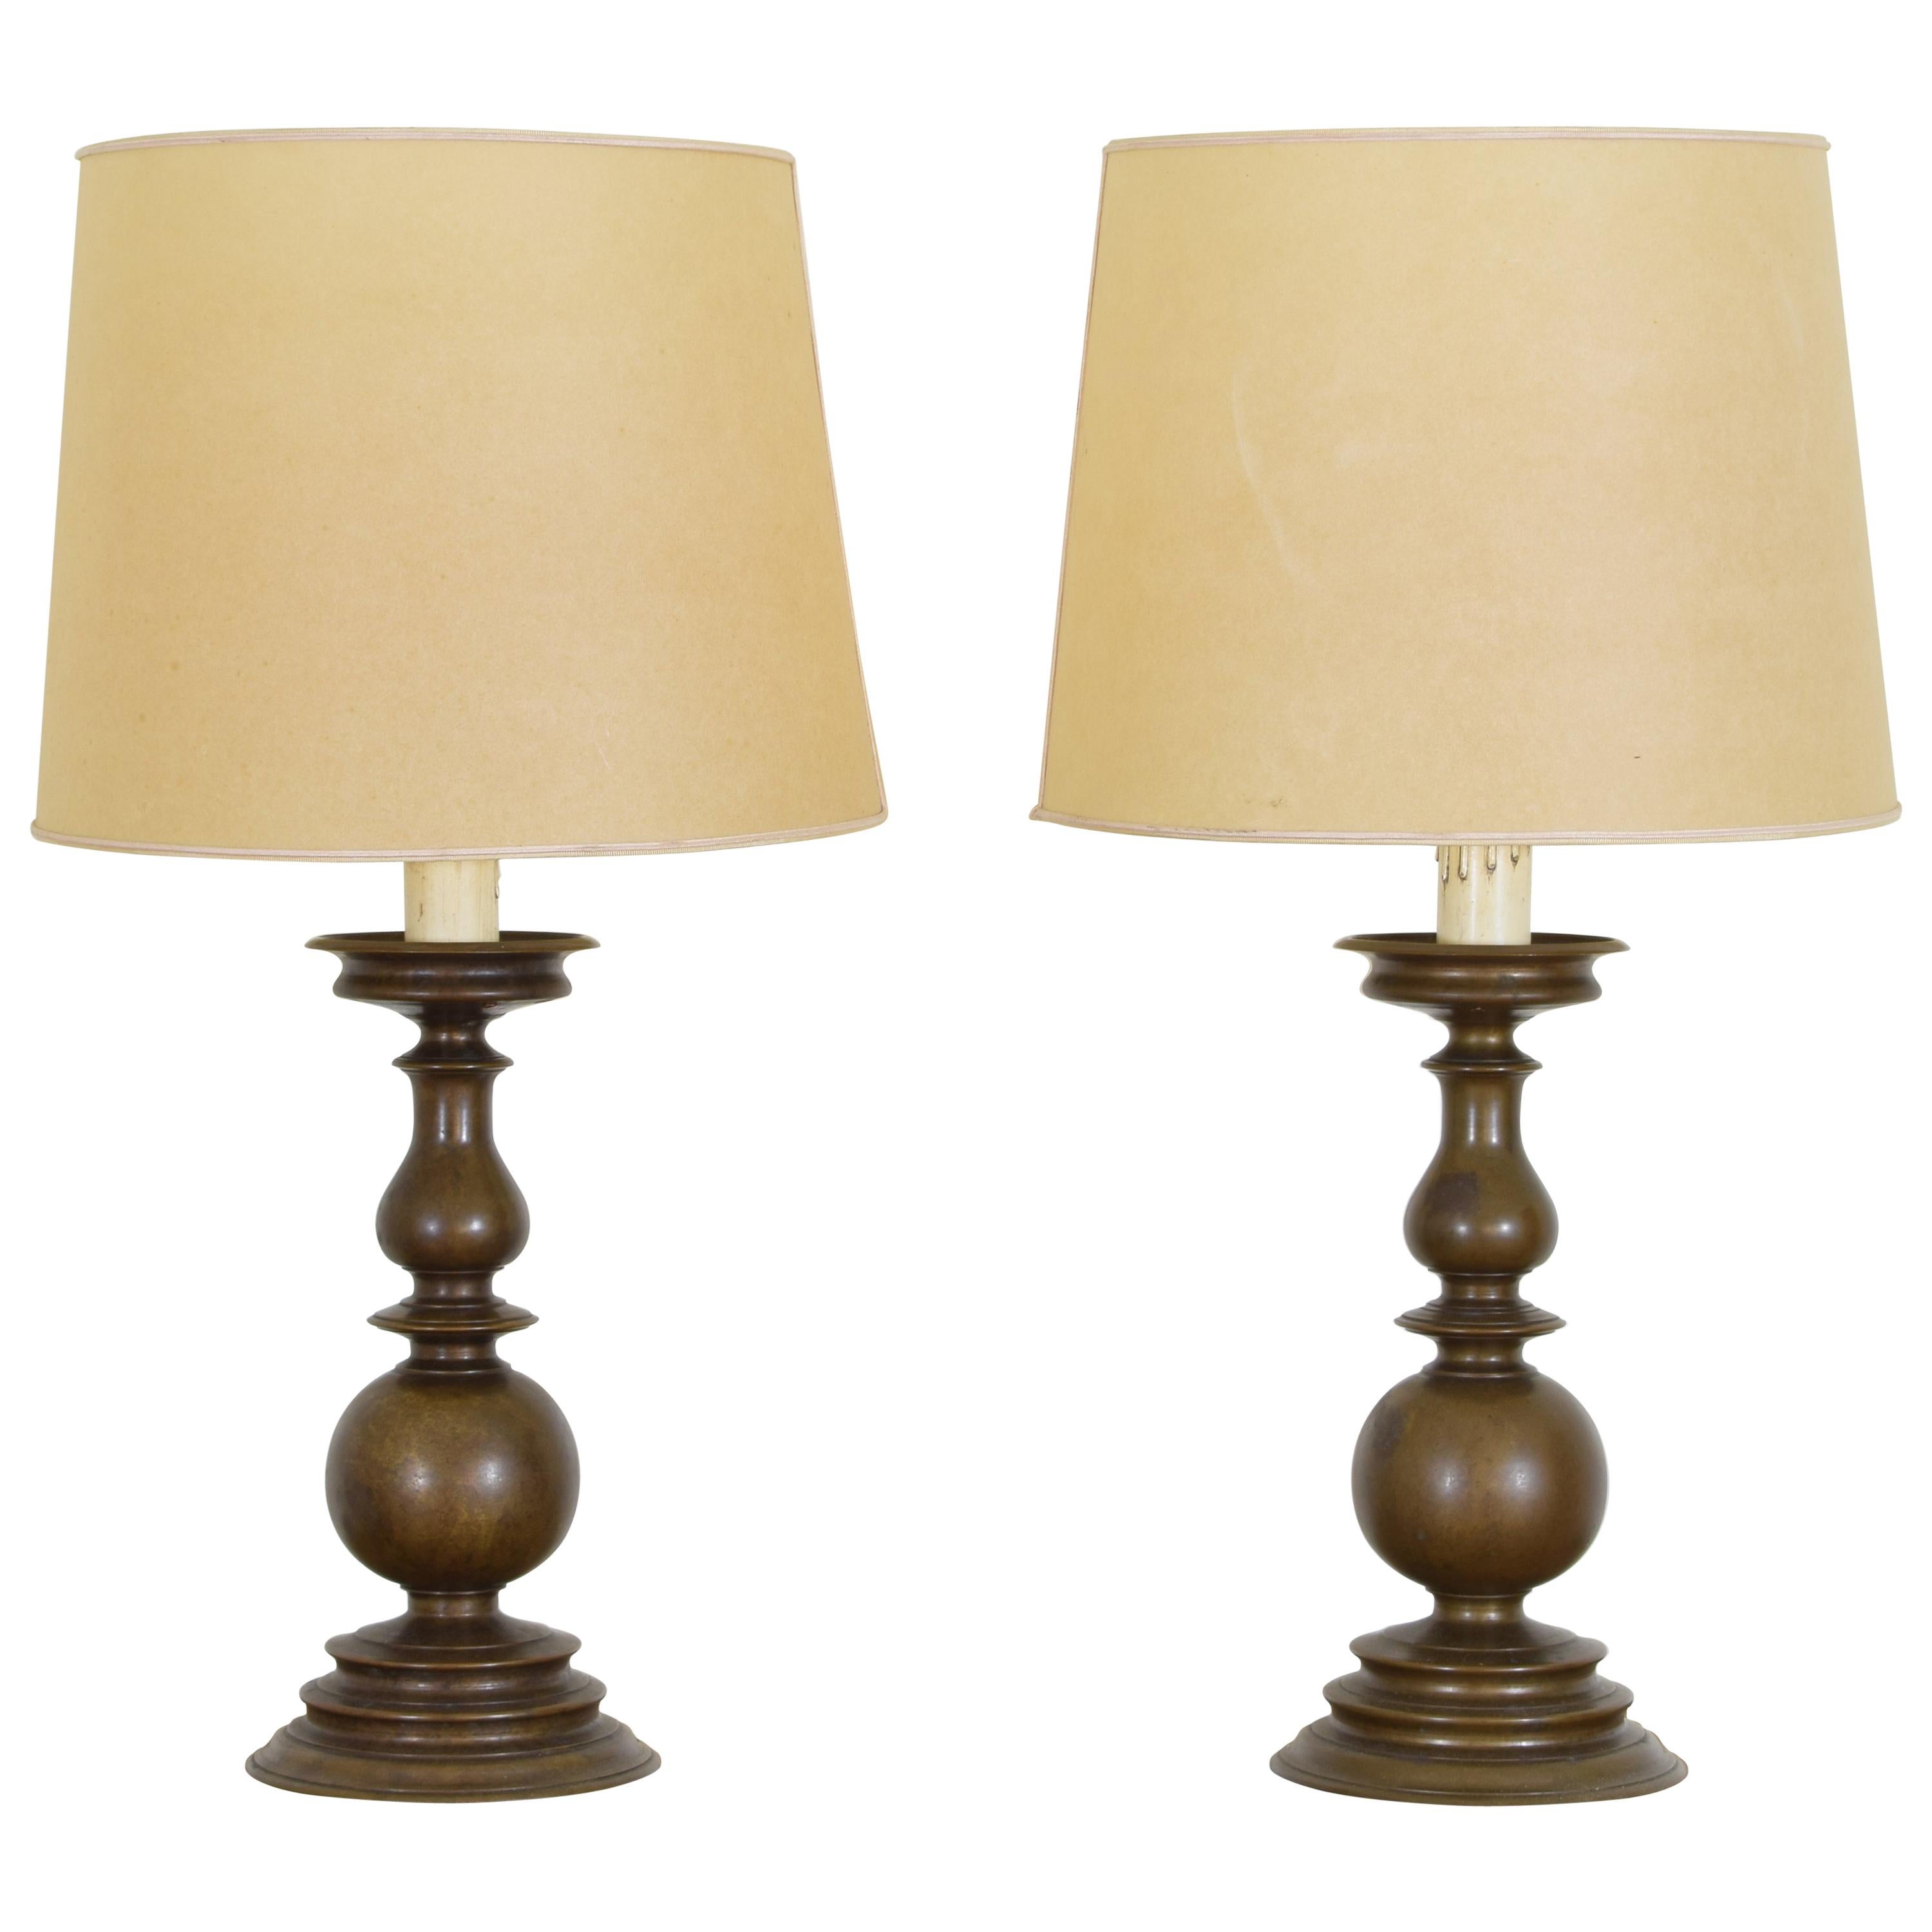 Pair of Italian Baroque Revival Patinated Brass Table Lamps, Late 19th Century